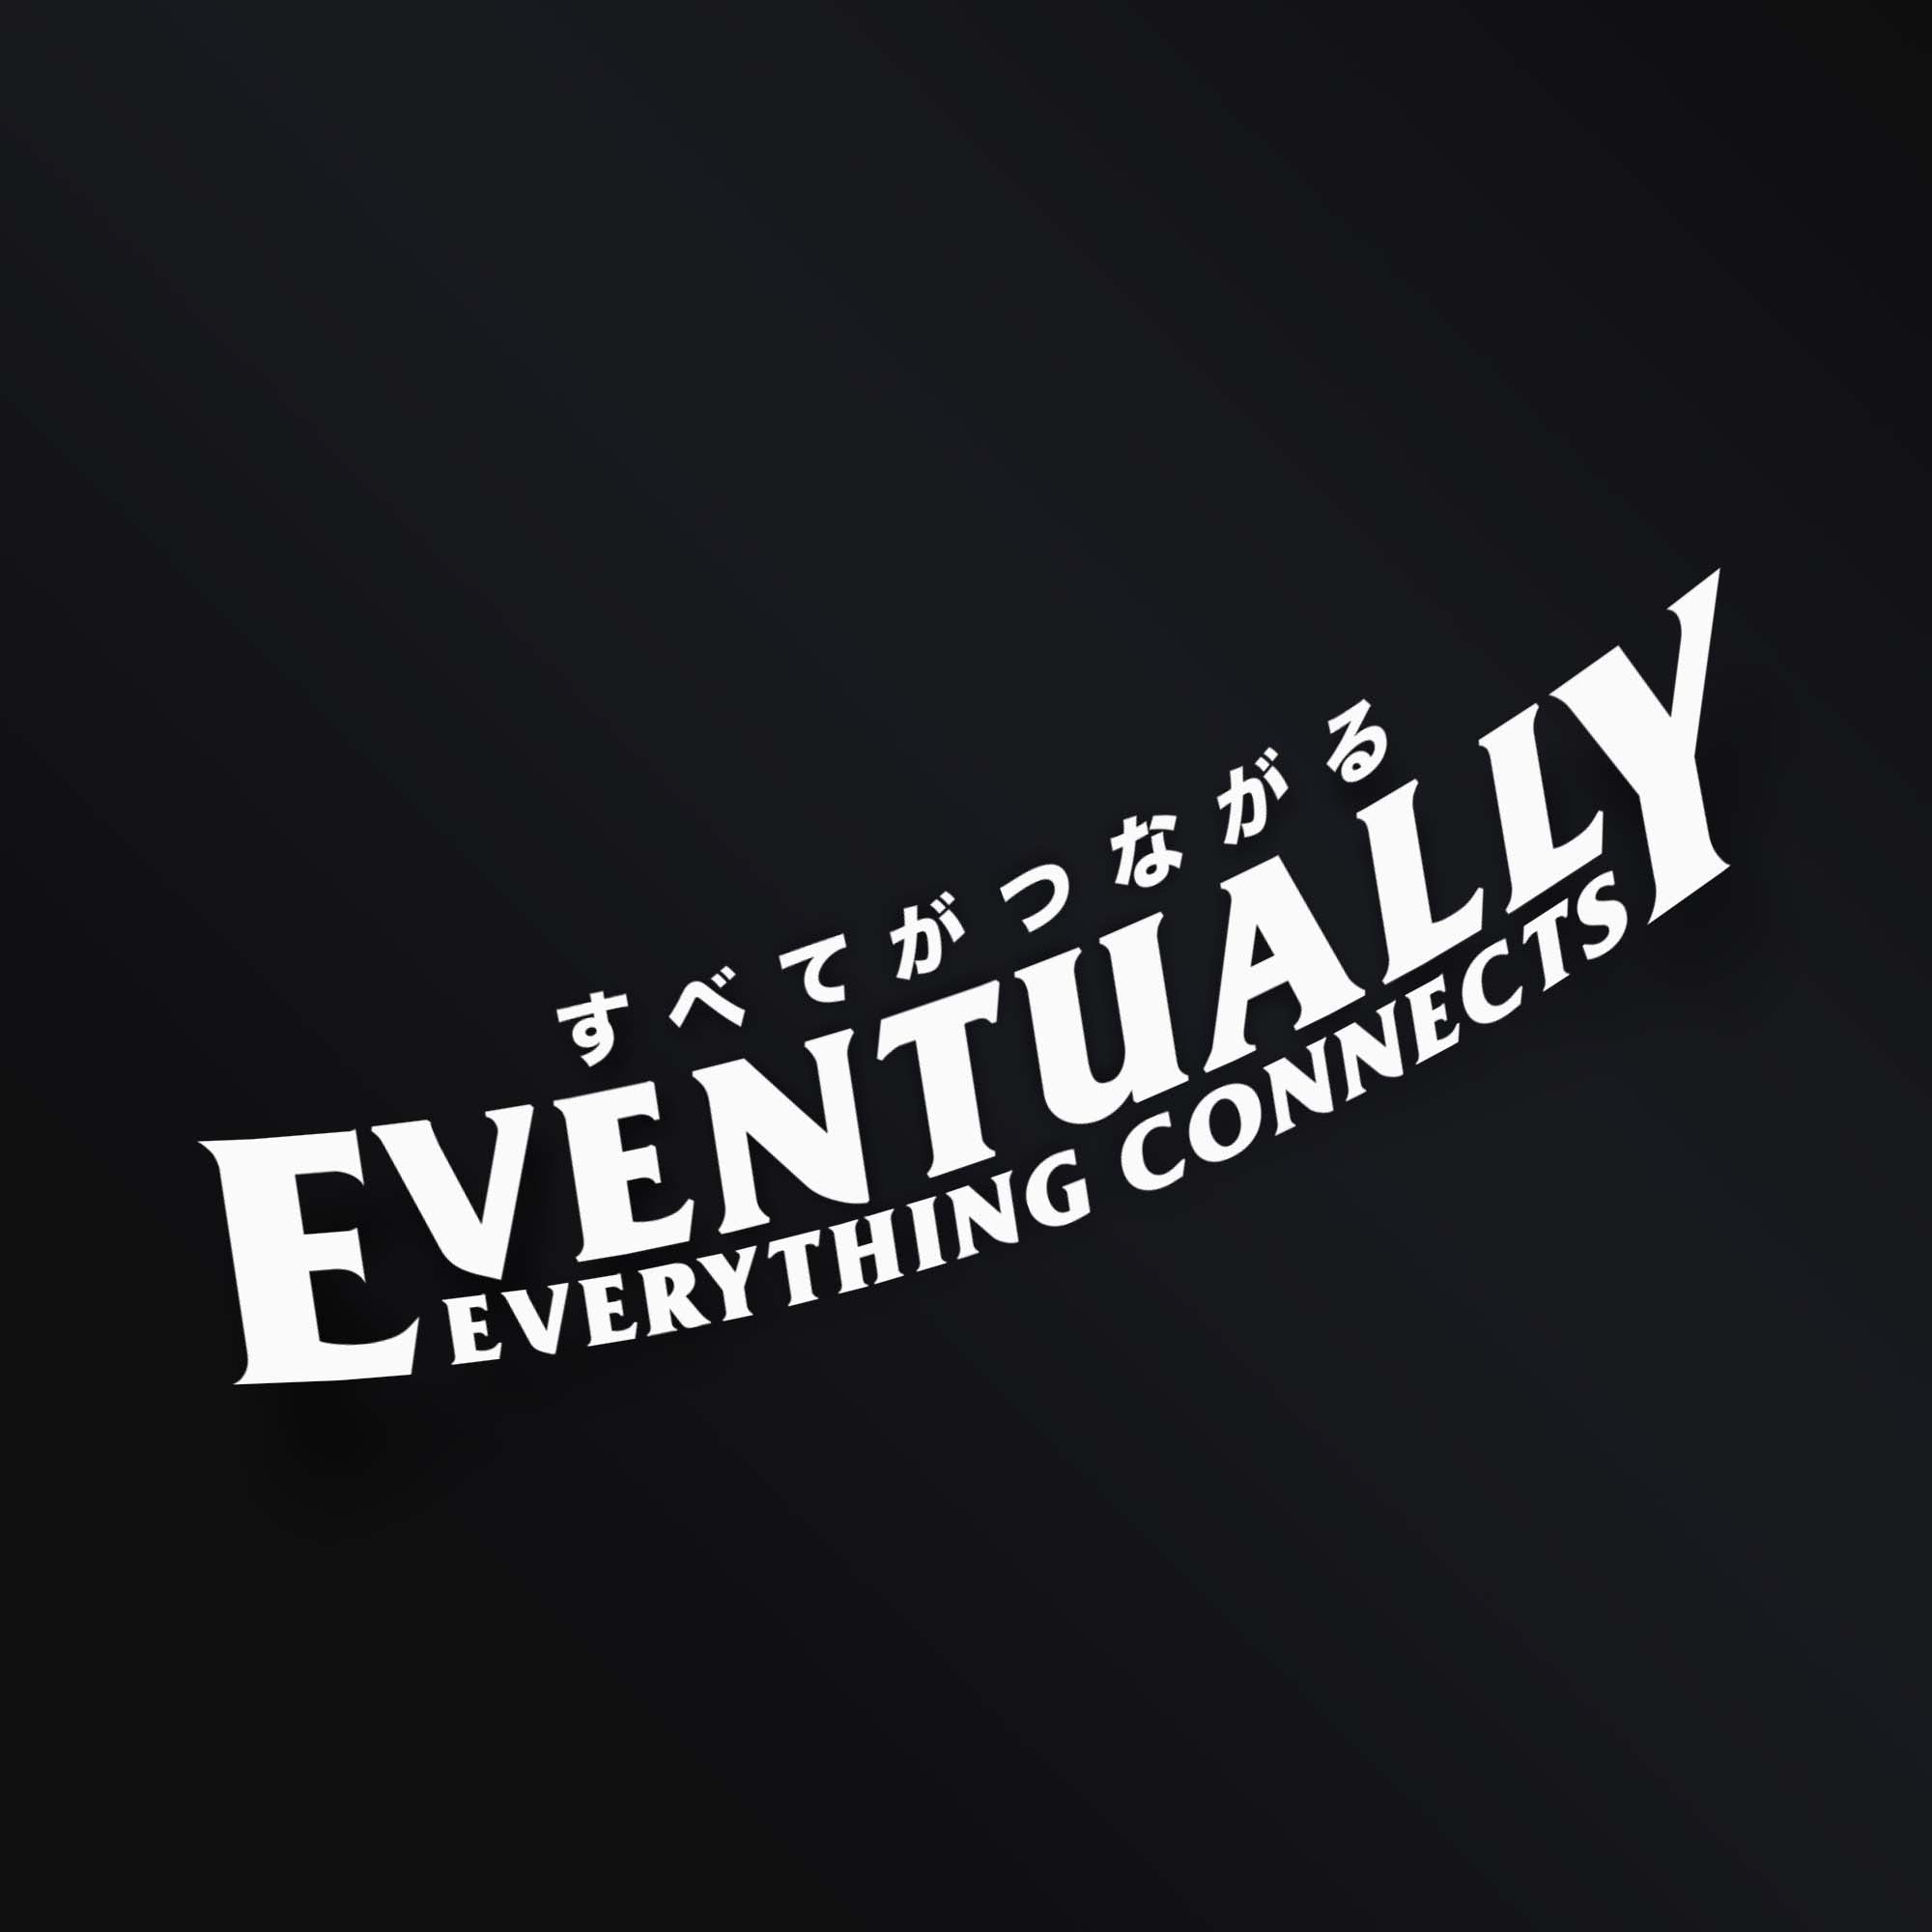 EVENTUALLY EVERYTHING CONNECTS STICKER